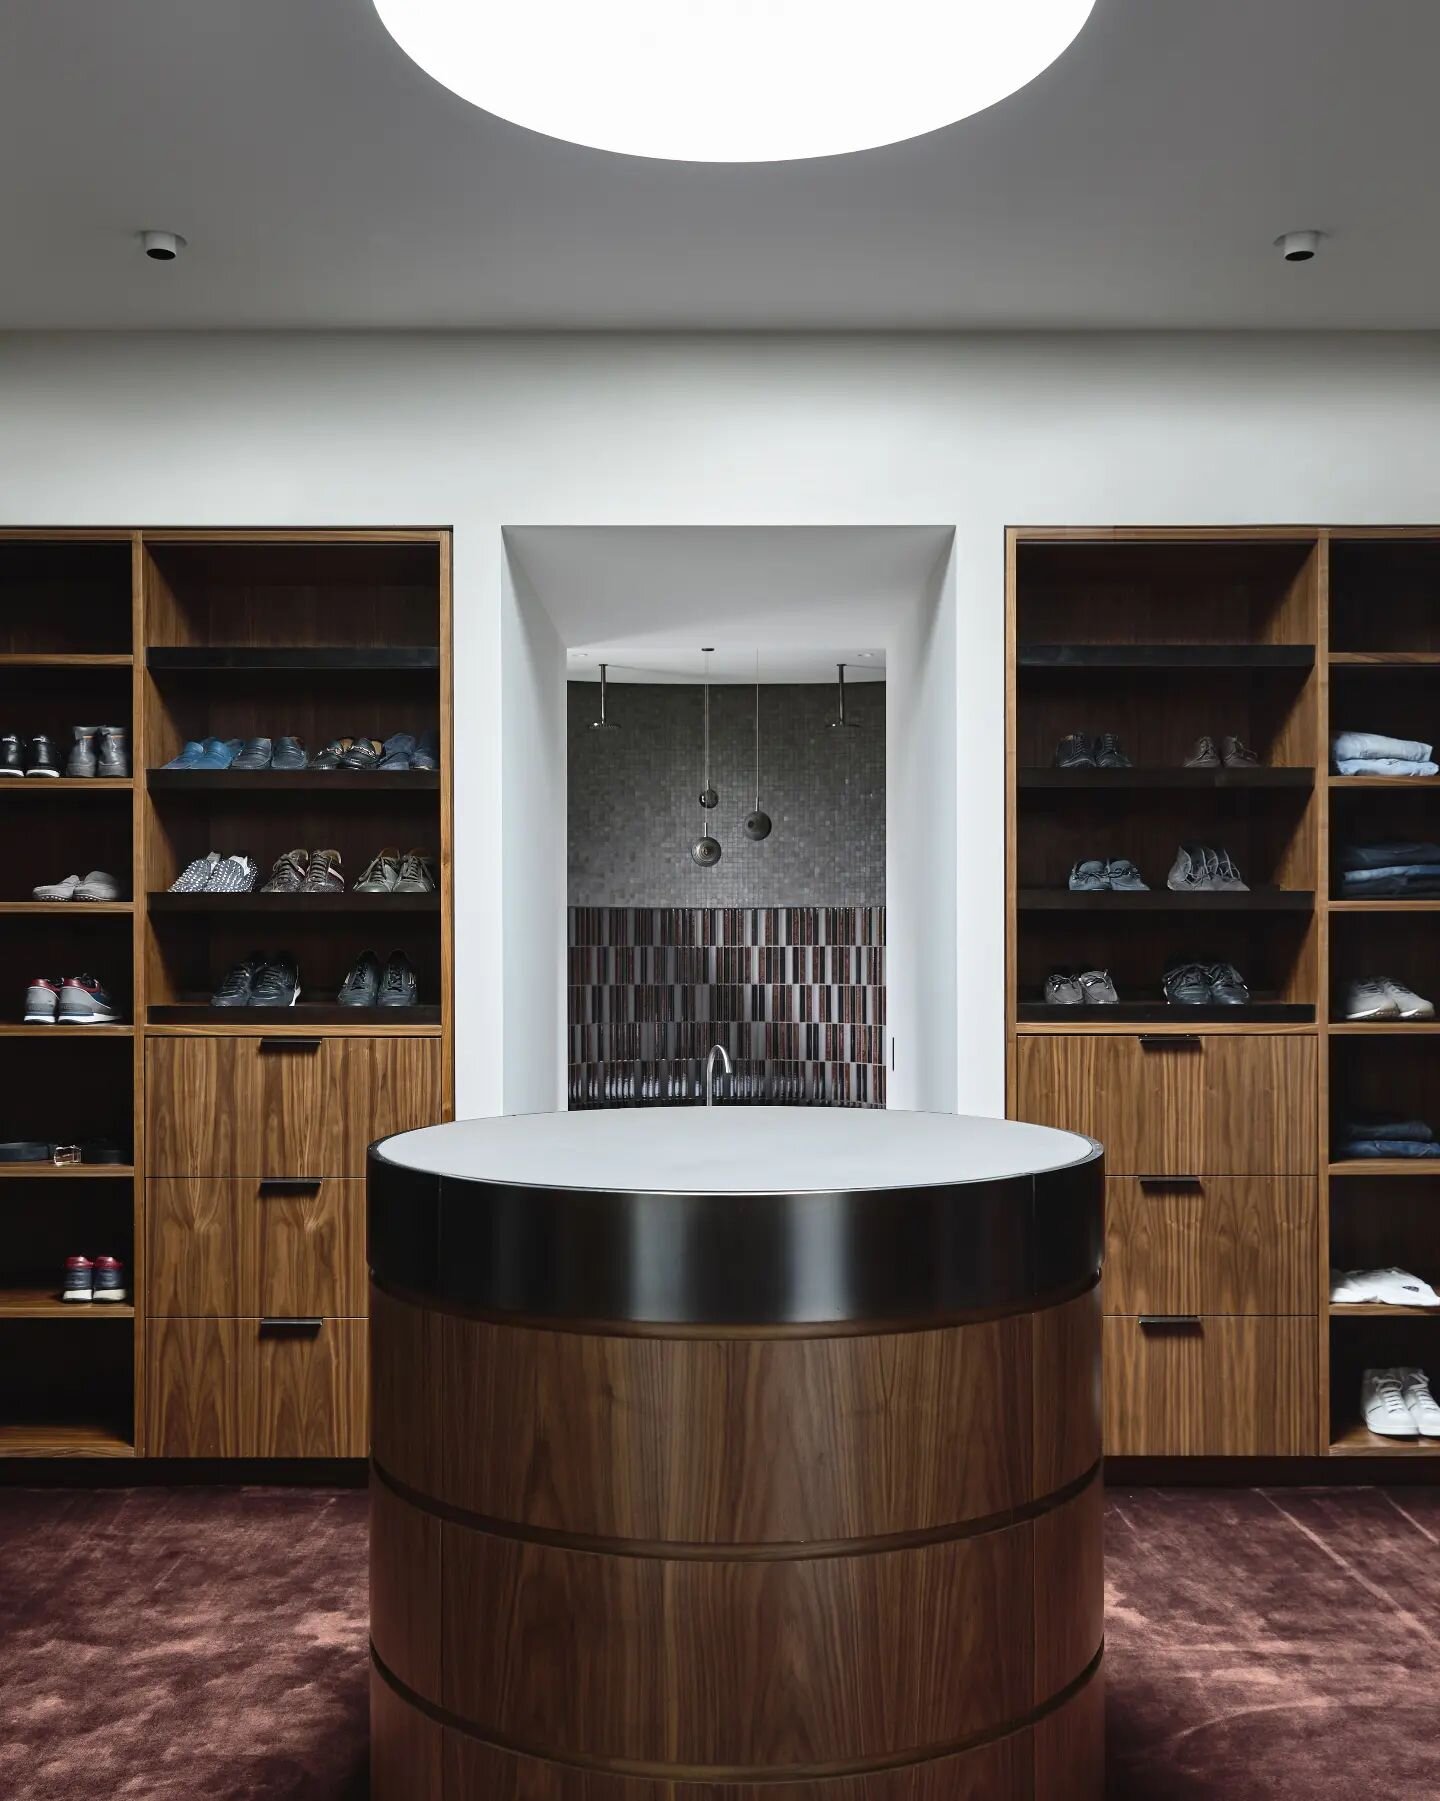 Walk in Wardrobe magic. Walnut and bronze and delicious merlot carpet at our Myvore project. Timeless. Image by @derek_swalwell Joinery by @enc_joinery

#walkinwardrobe #designedinmelbourne #walnut #luxe #contemporarydesign #Interiors #interior4inspo